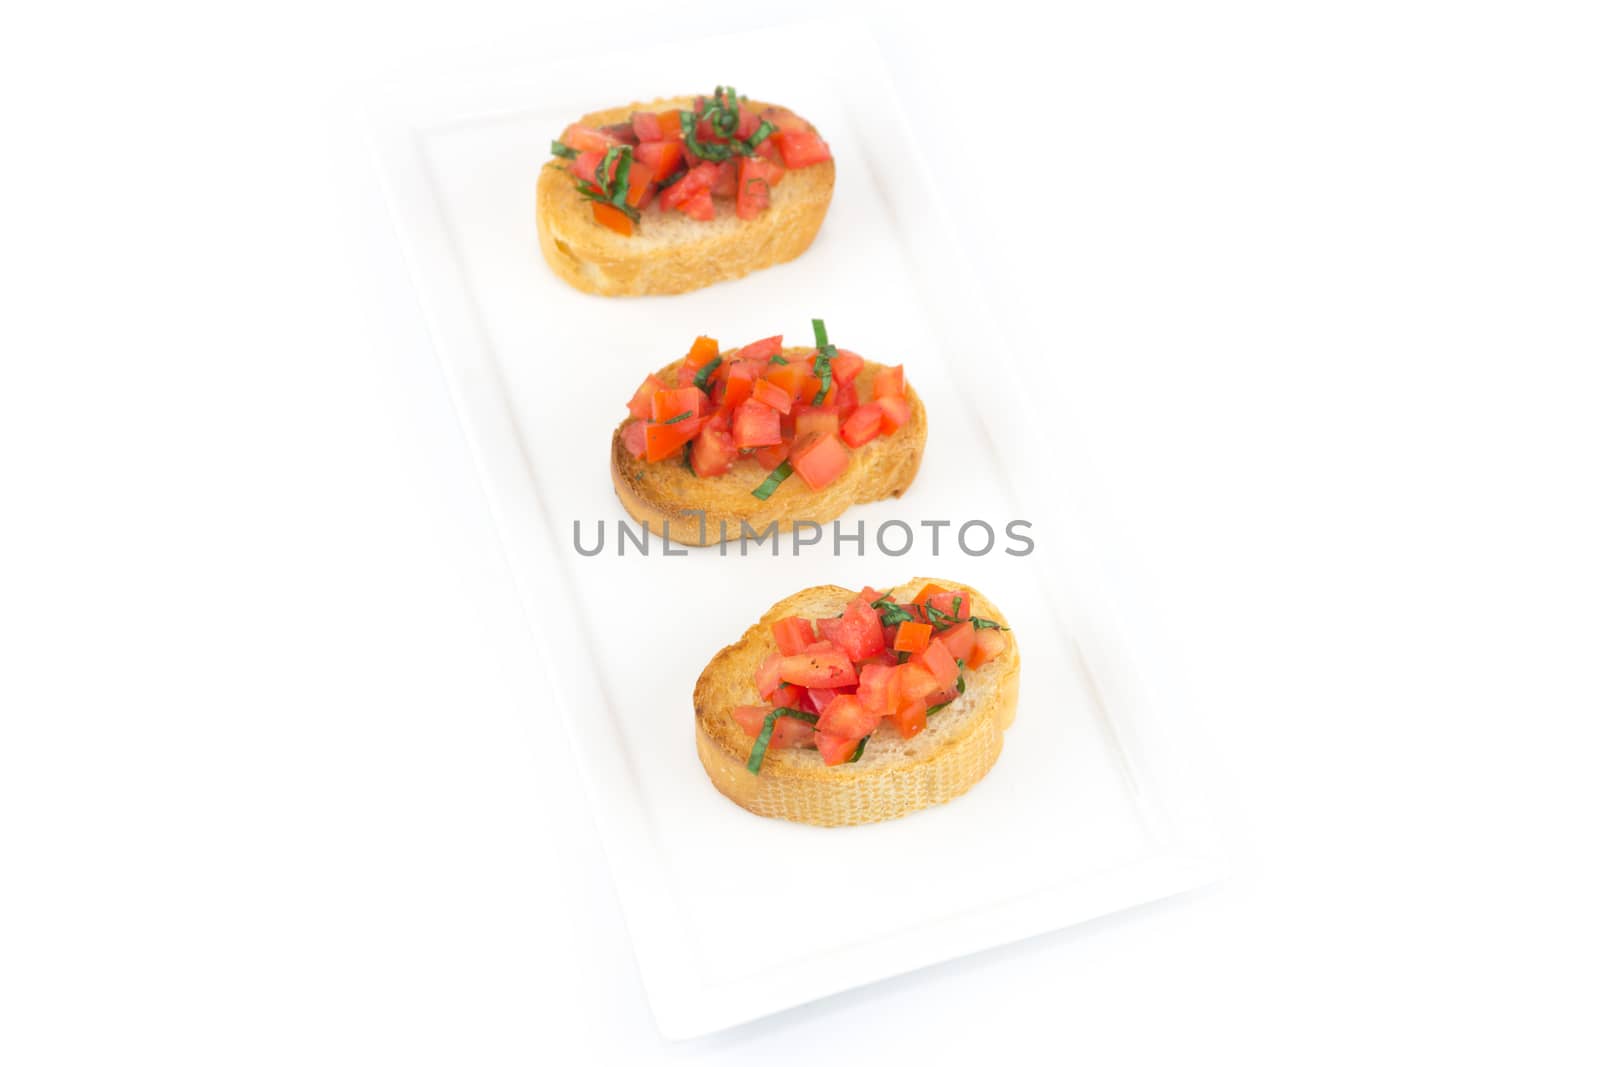 Bruschetta with roasted bell pepper, goat cheese, garlic and her by wyoosumran